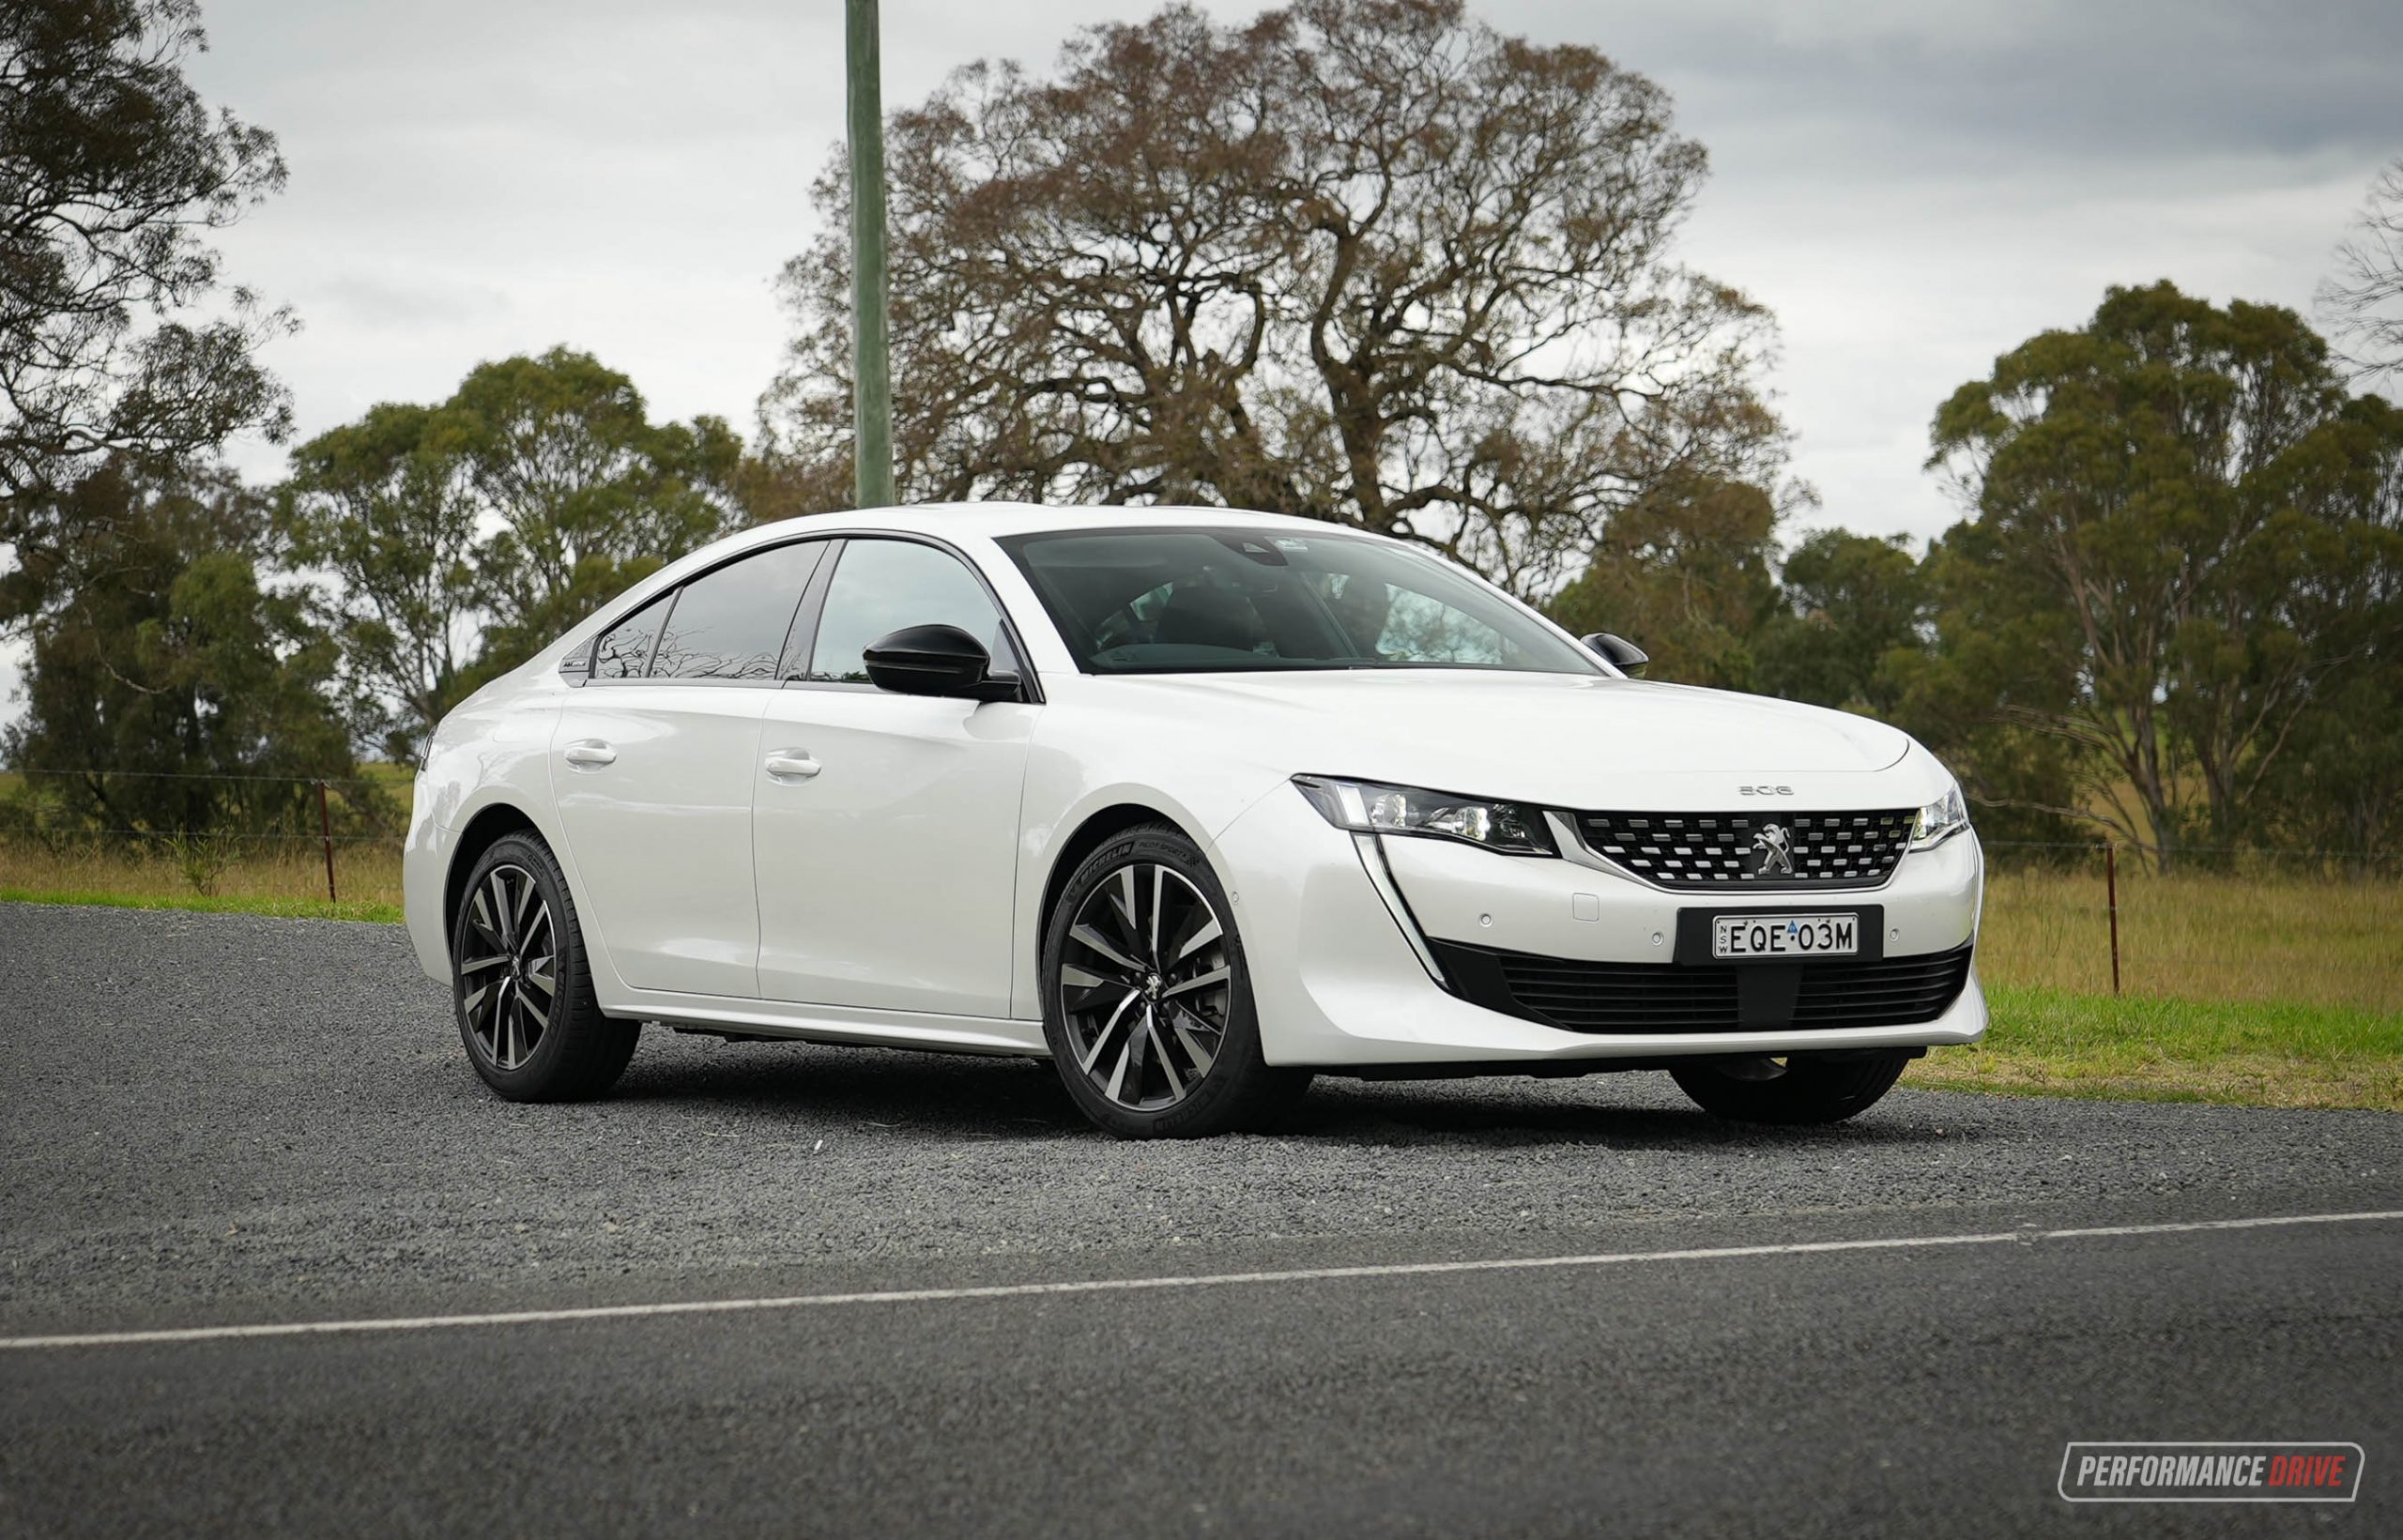 2022 Peugeot 508 GT Hybrid review (video)